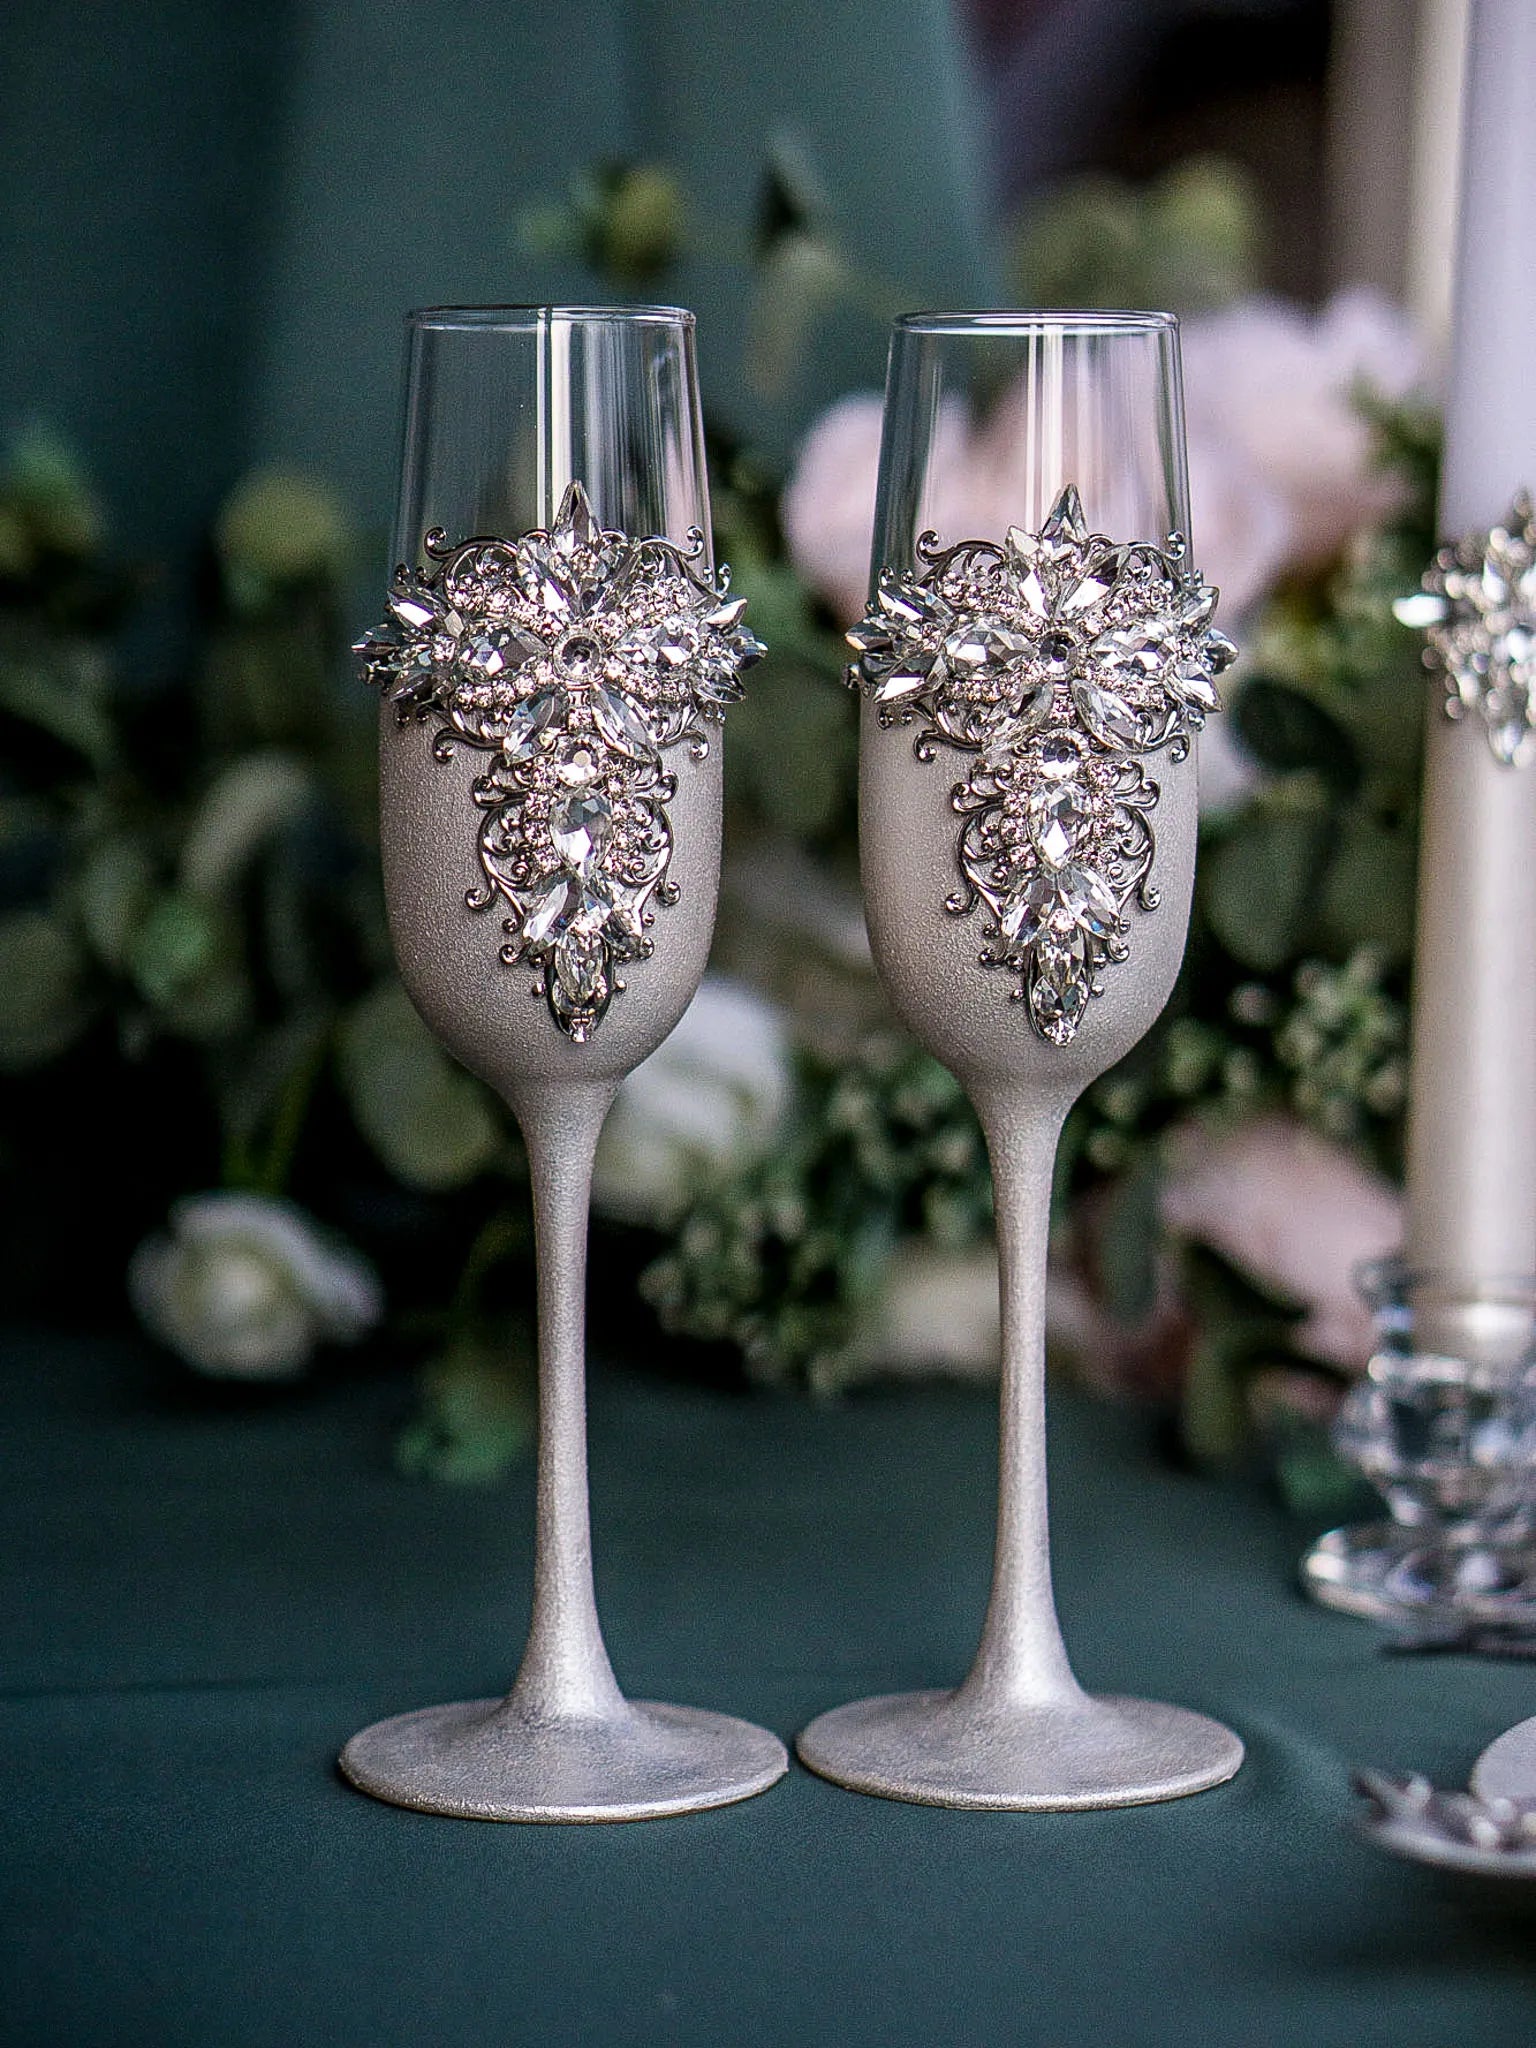 Crystal Navy toasting flutes set of 2. Engraved Wedding glasses for bride  and groom.